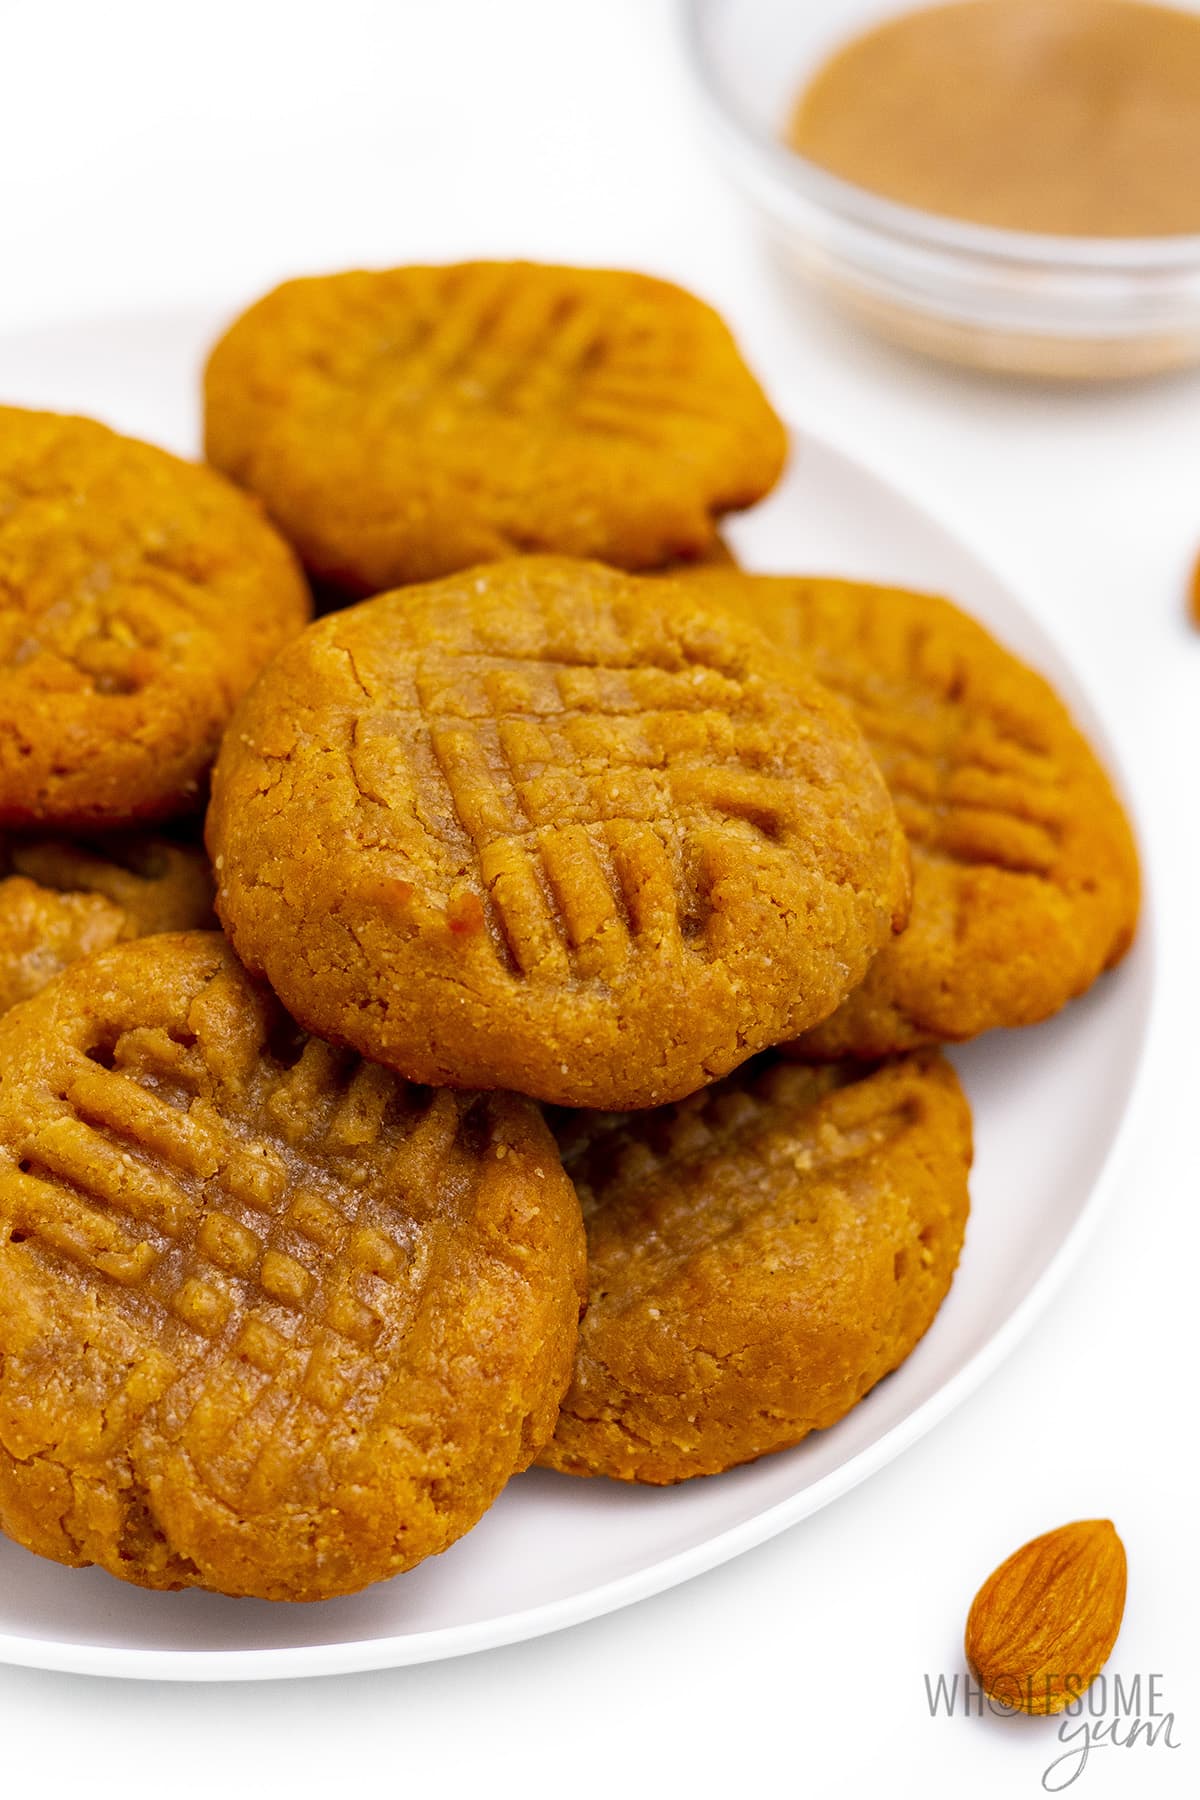 Complete the Almond Butter Cookies recipe on a plate.